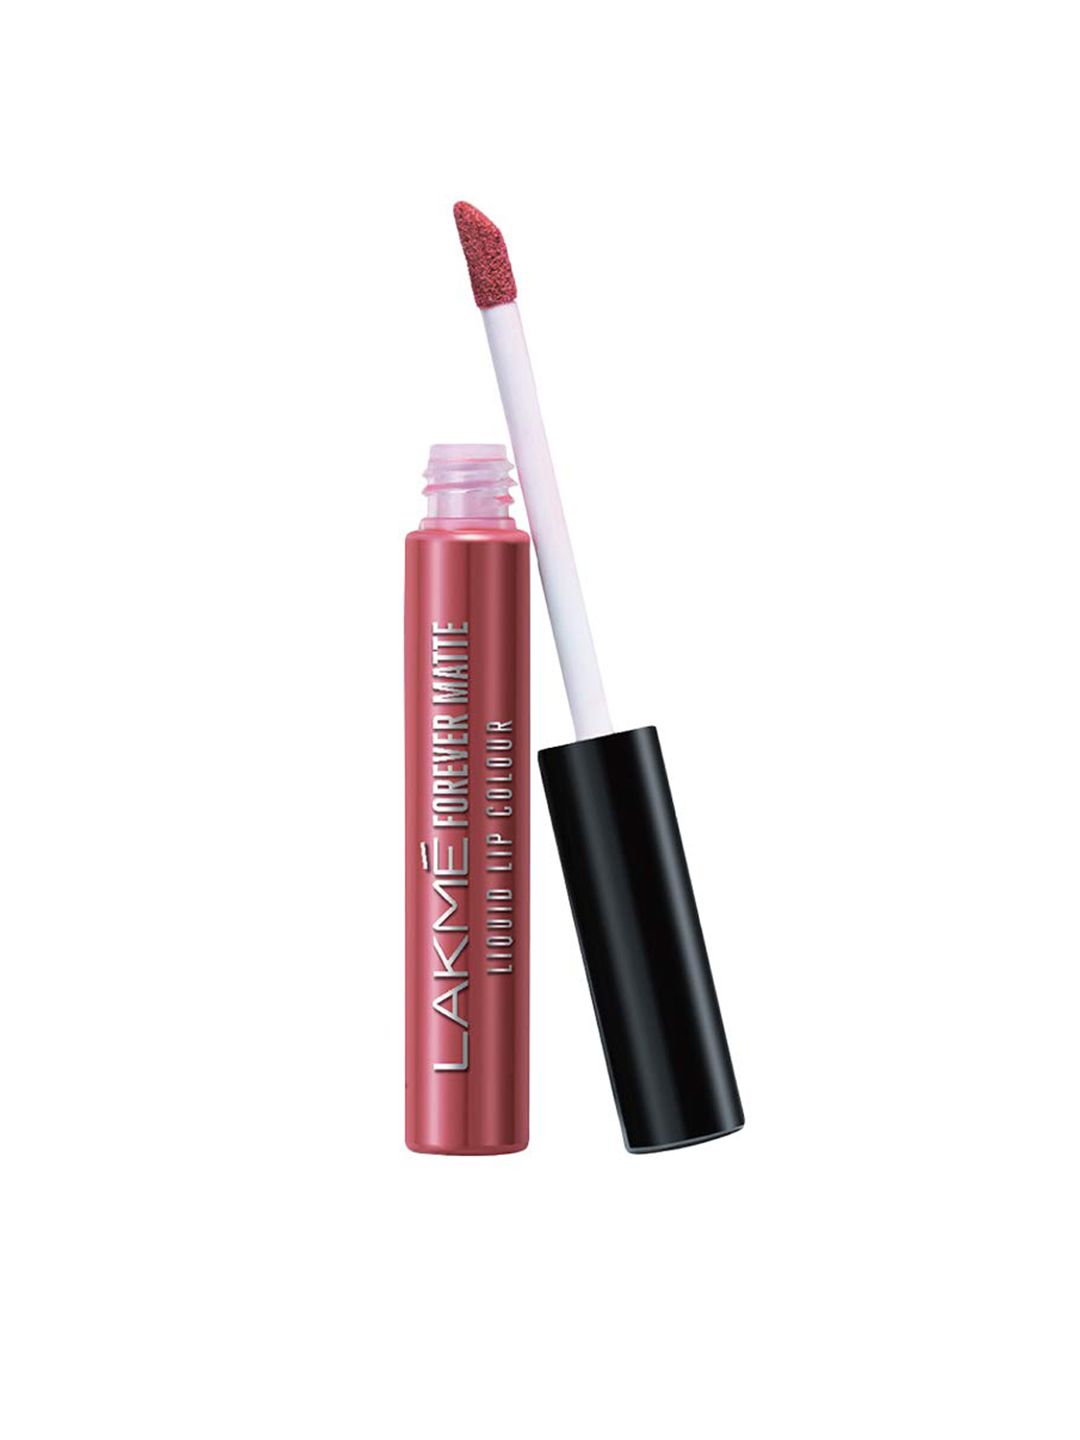 Lakme Forever Matte Liquid Lip Colour - Pink Ballet 25 Price in India